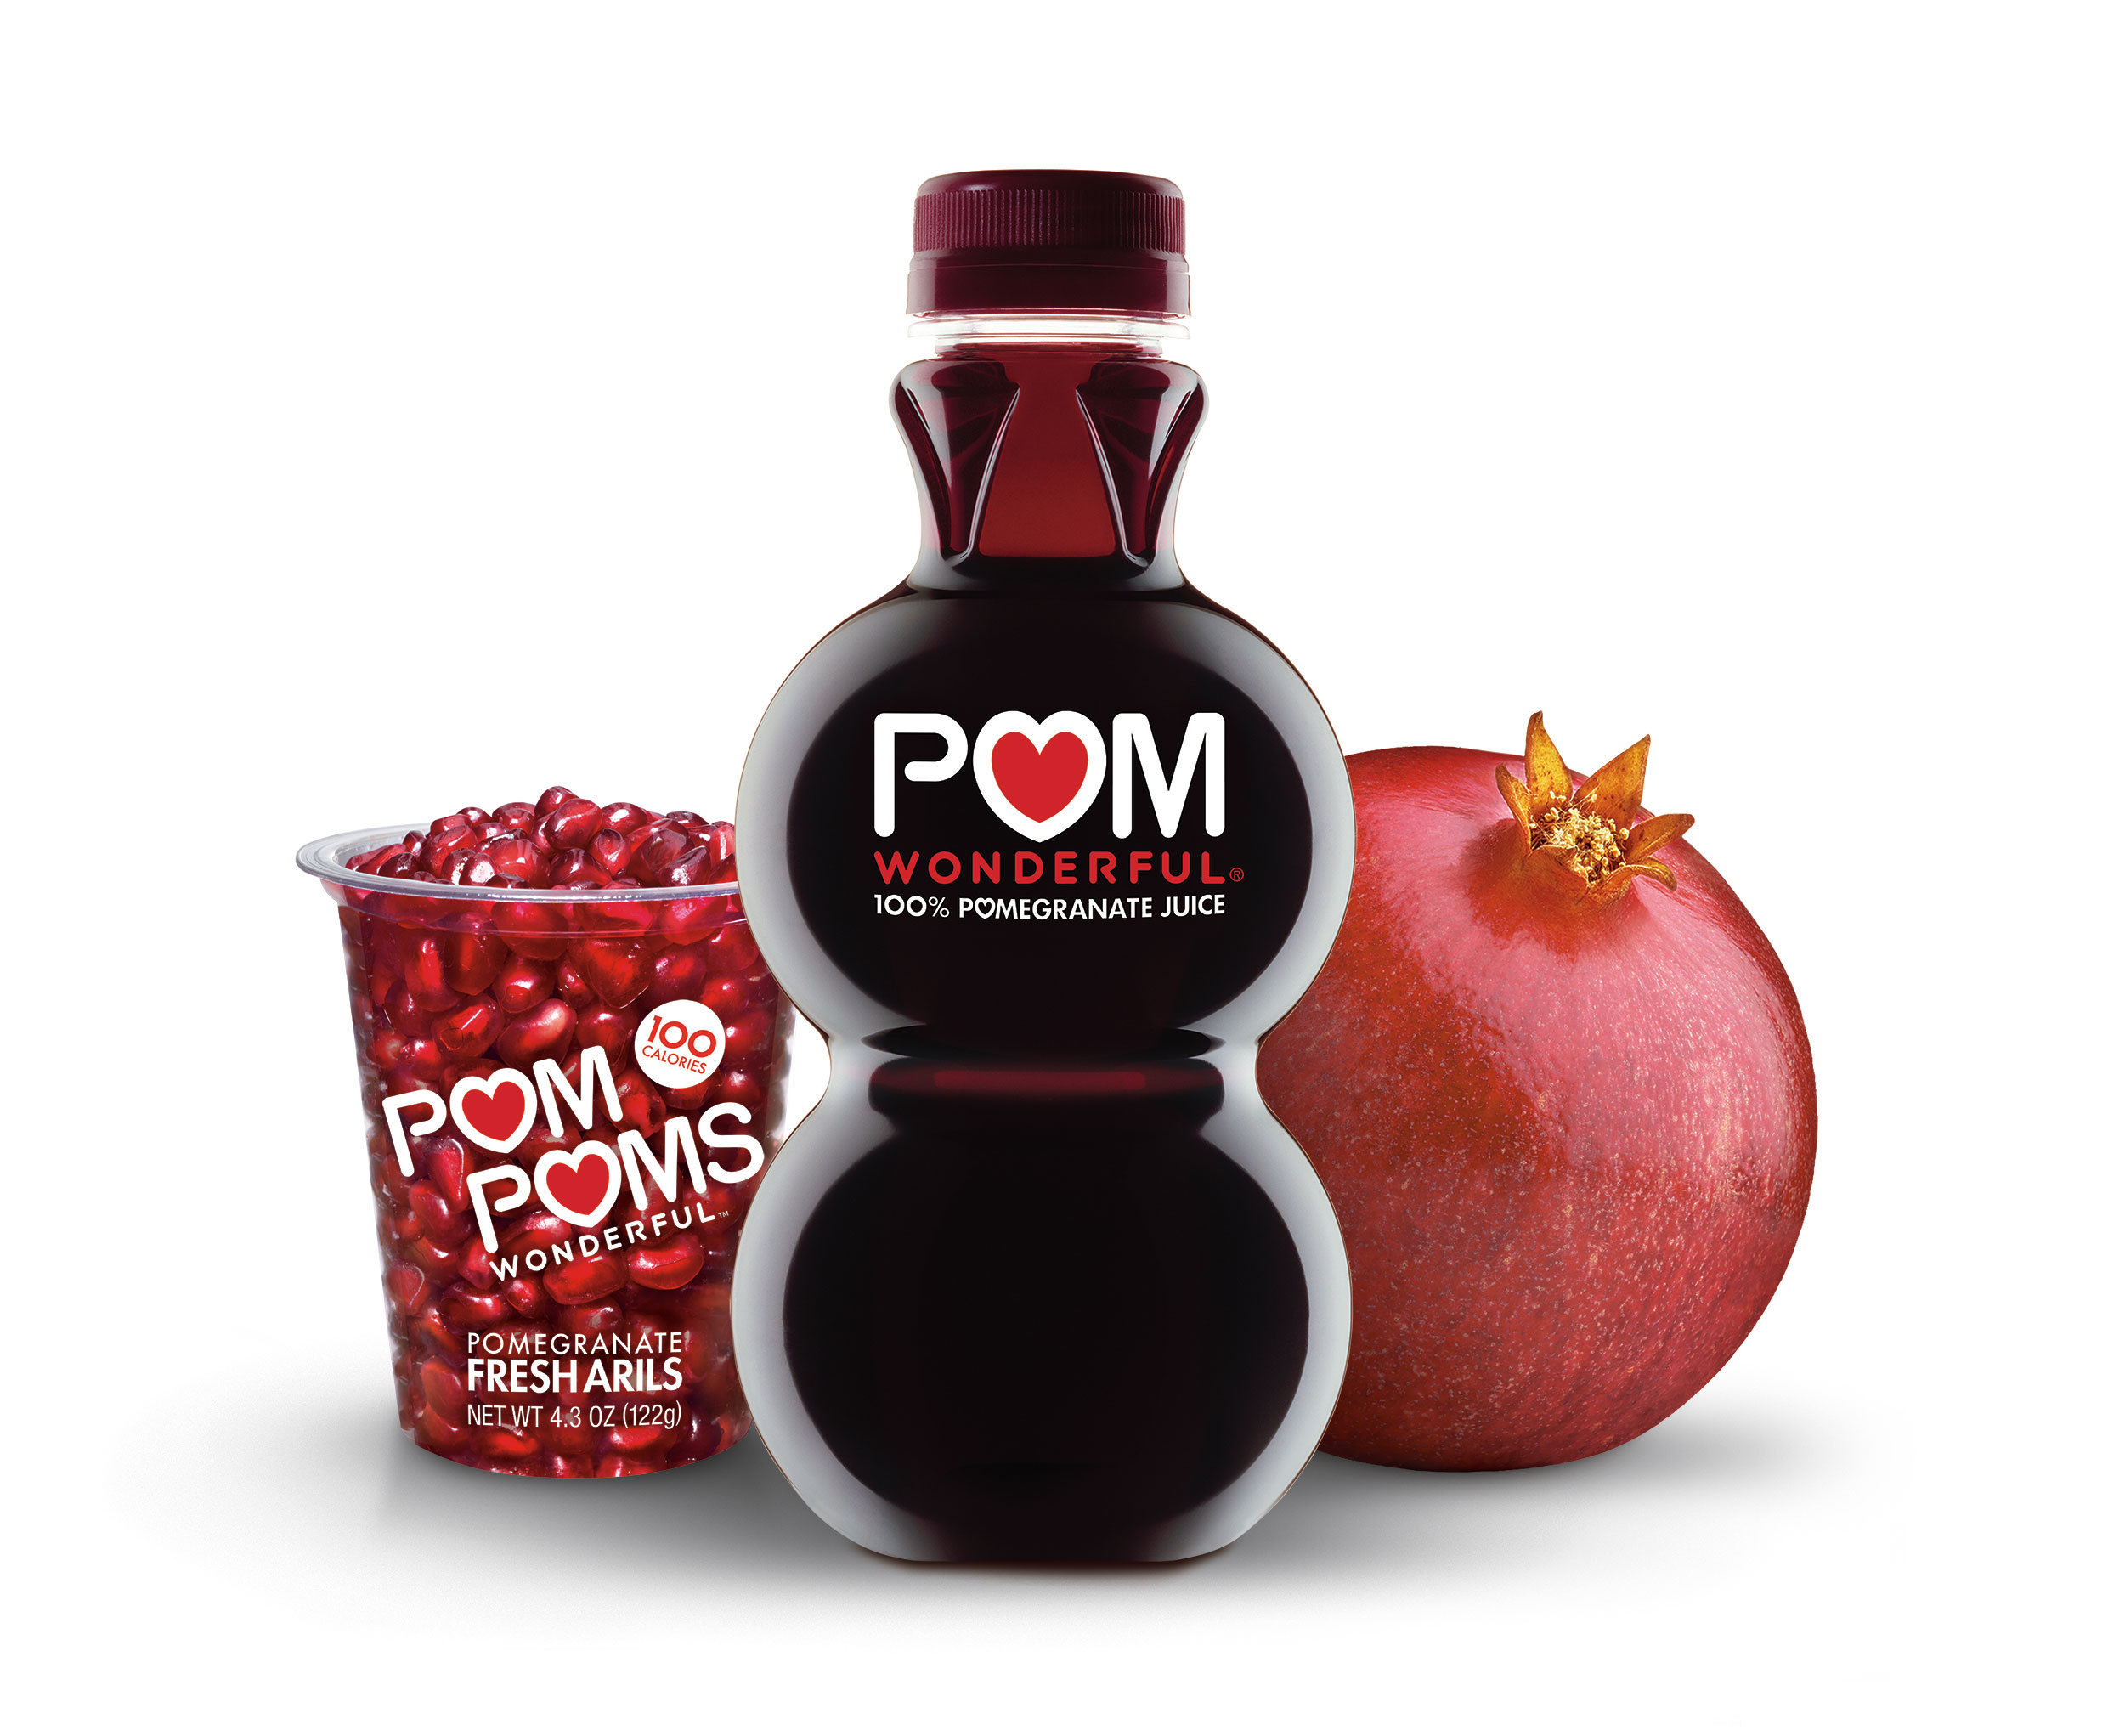 Decode Male helgen POM Wonderful Gets Crazy Healthy with New TV Campaign to Kick-Off  Pomegranate Season | Business Wire